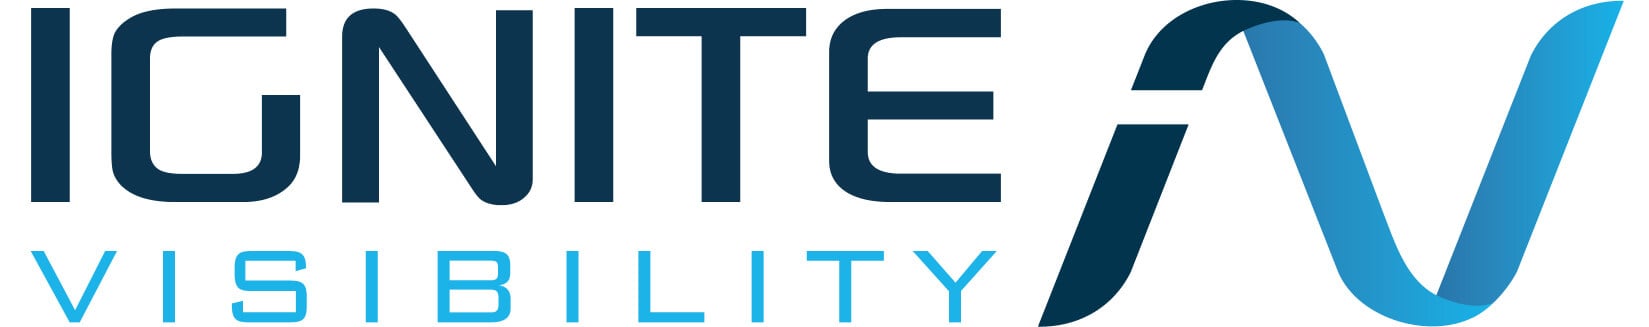 Top ORM Agency Logo: Ignite Visibility